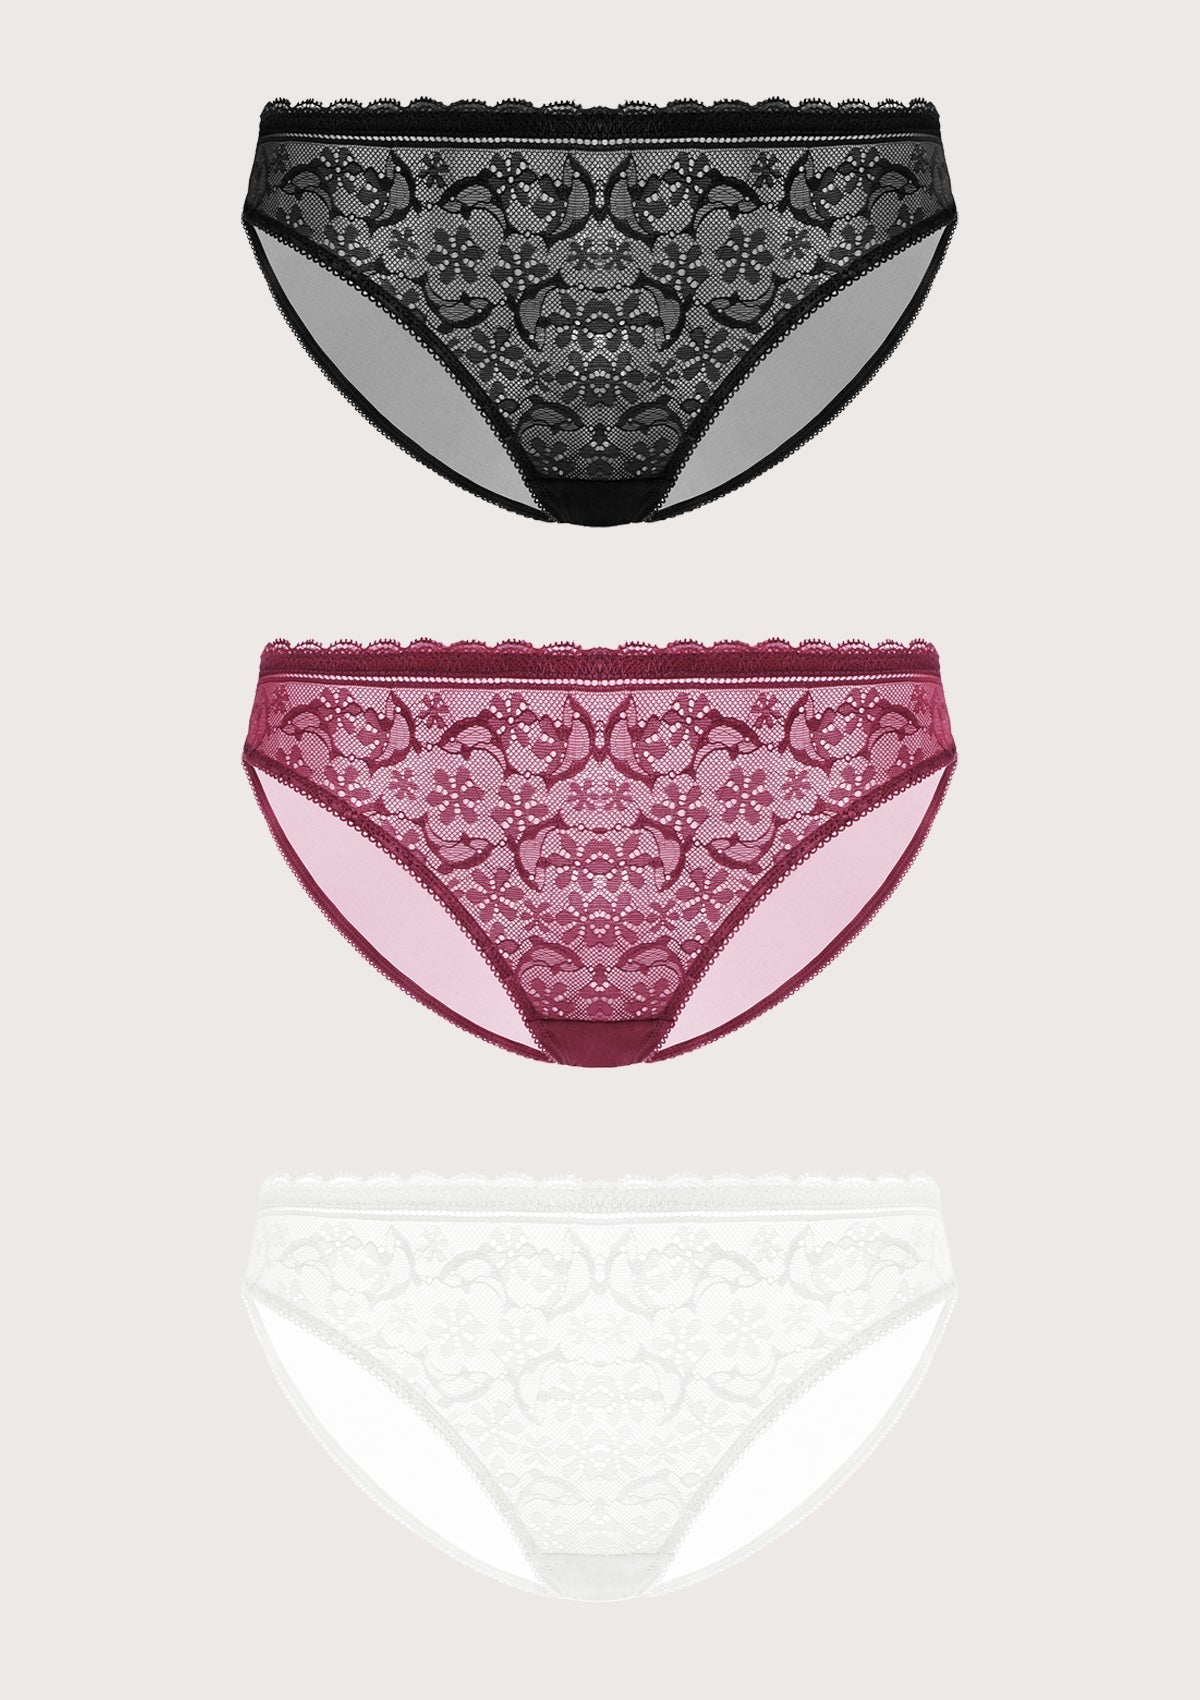 HSIA Anemone Lace Dolphin-Patterned Front And Mesh Back Panties-3 Pack - XL / Black+Burgundy+White